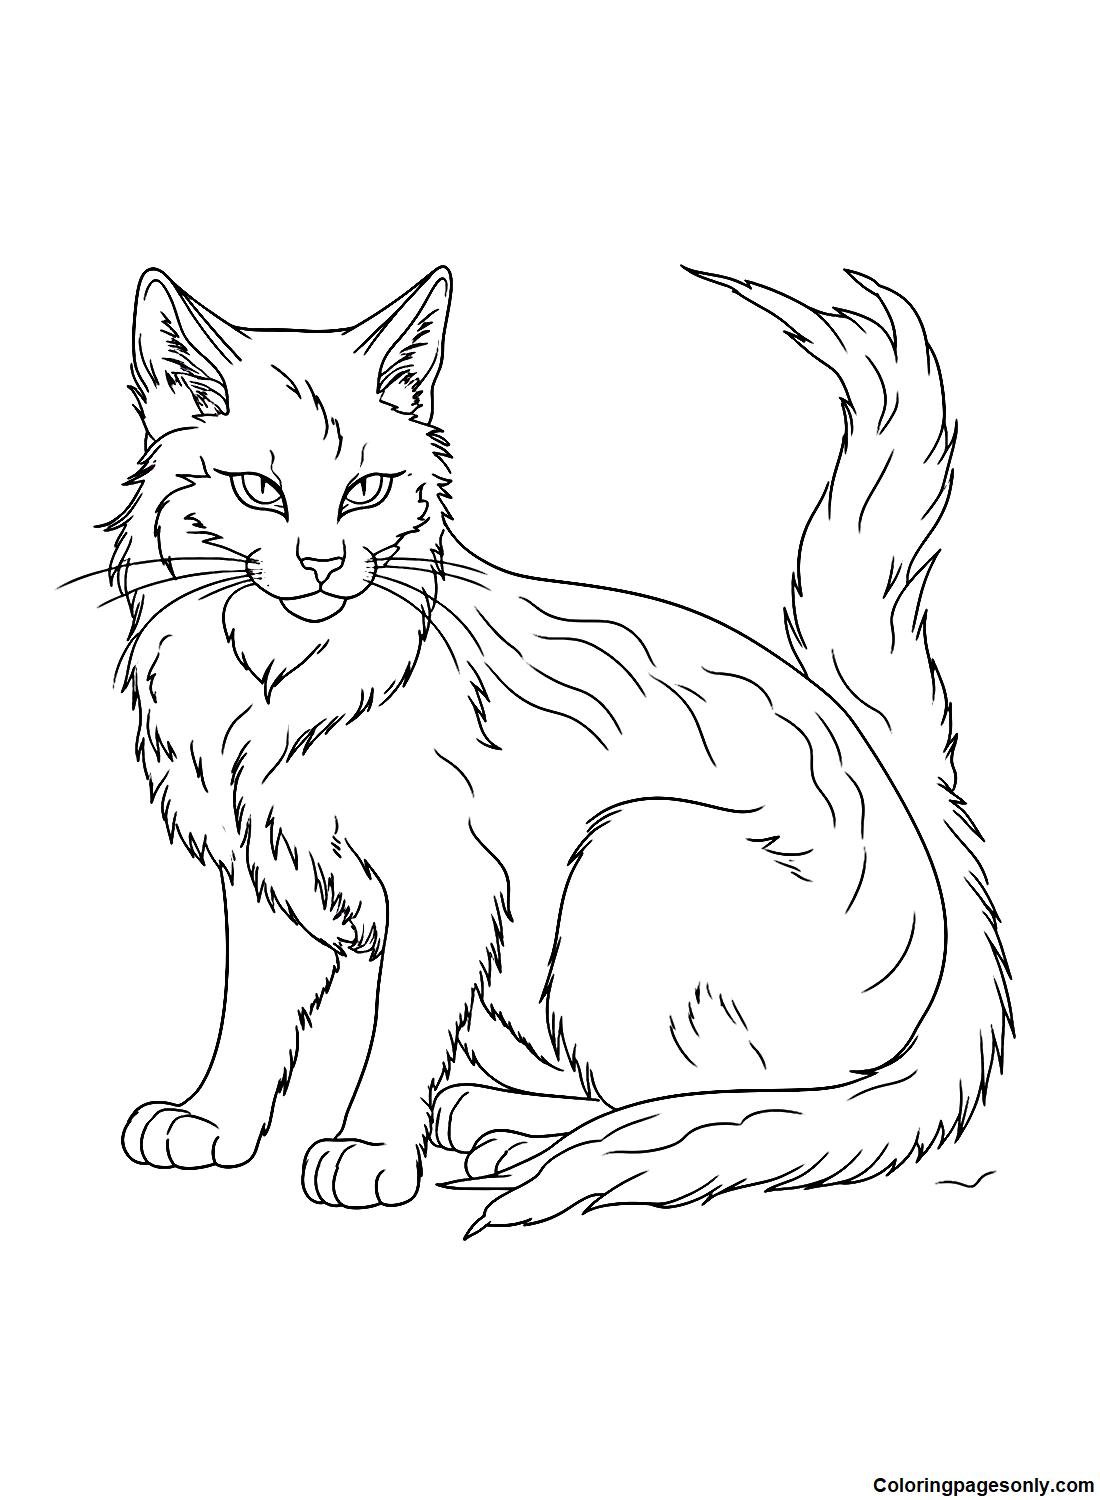 warrior cats coloring pages printable